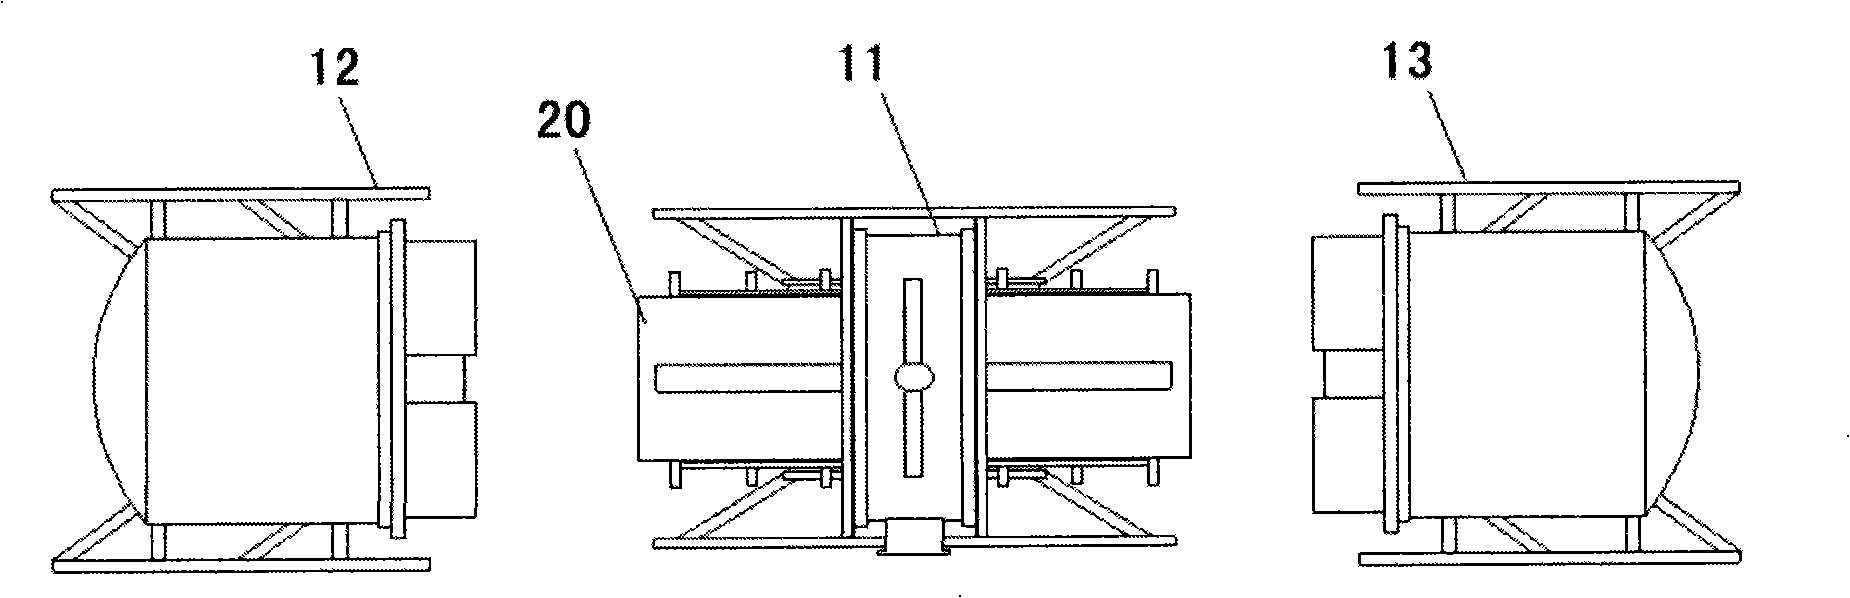 Plasma chemical vapor deposition vacuum apparatus for photovoltaic assembly scale manufacture